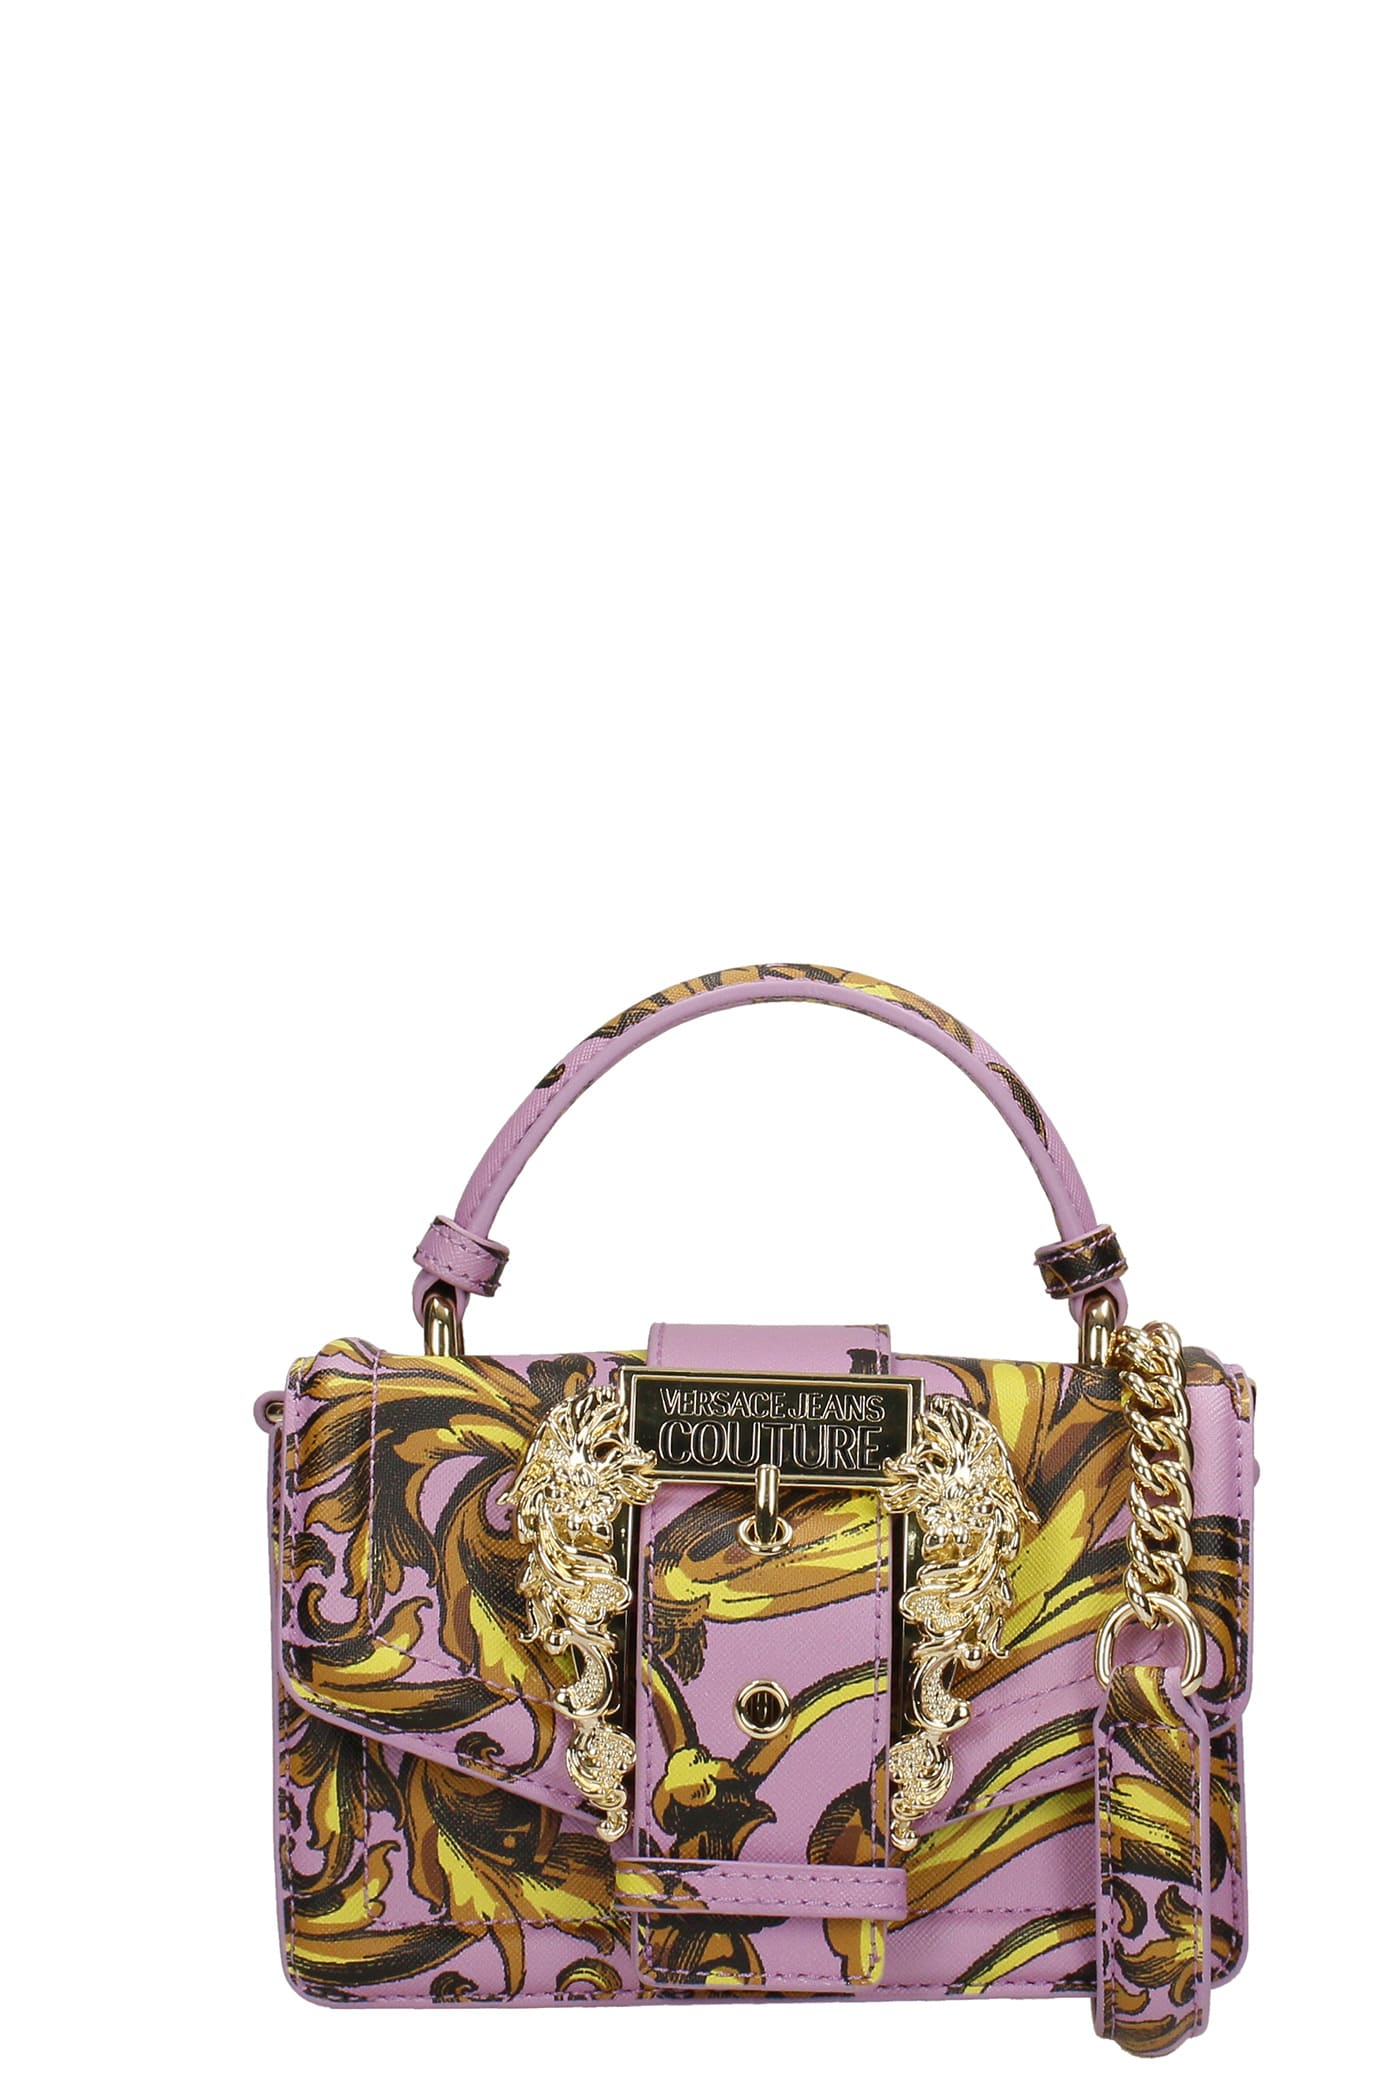 Versace Jeans Couture Hand Bag In Rose-pink Faux Leather